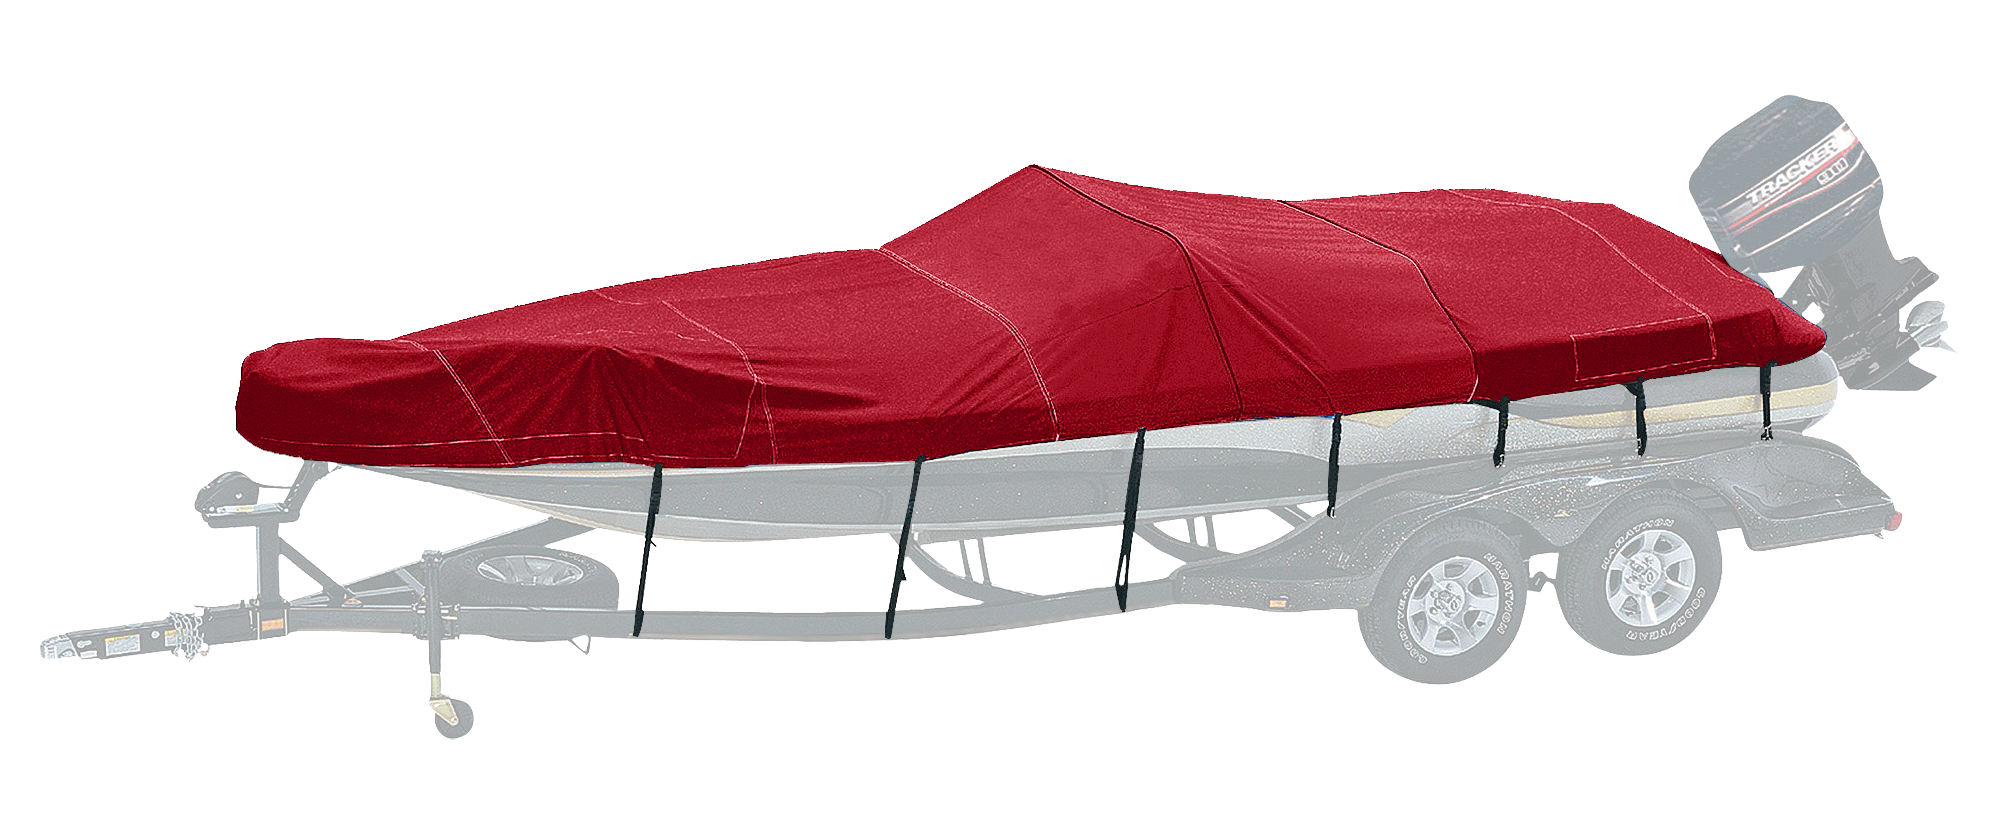 Bass Pro Shops Exact Fit Boat Cover by Westland - Tahoe - '04-'05 254 DB Standard I/O w/Ext. - Burgundy